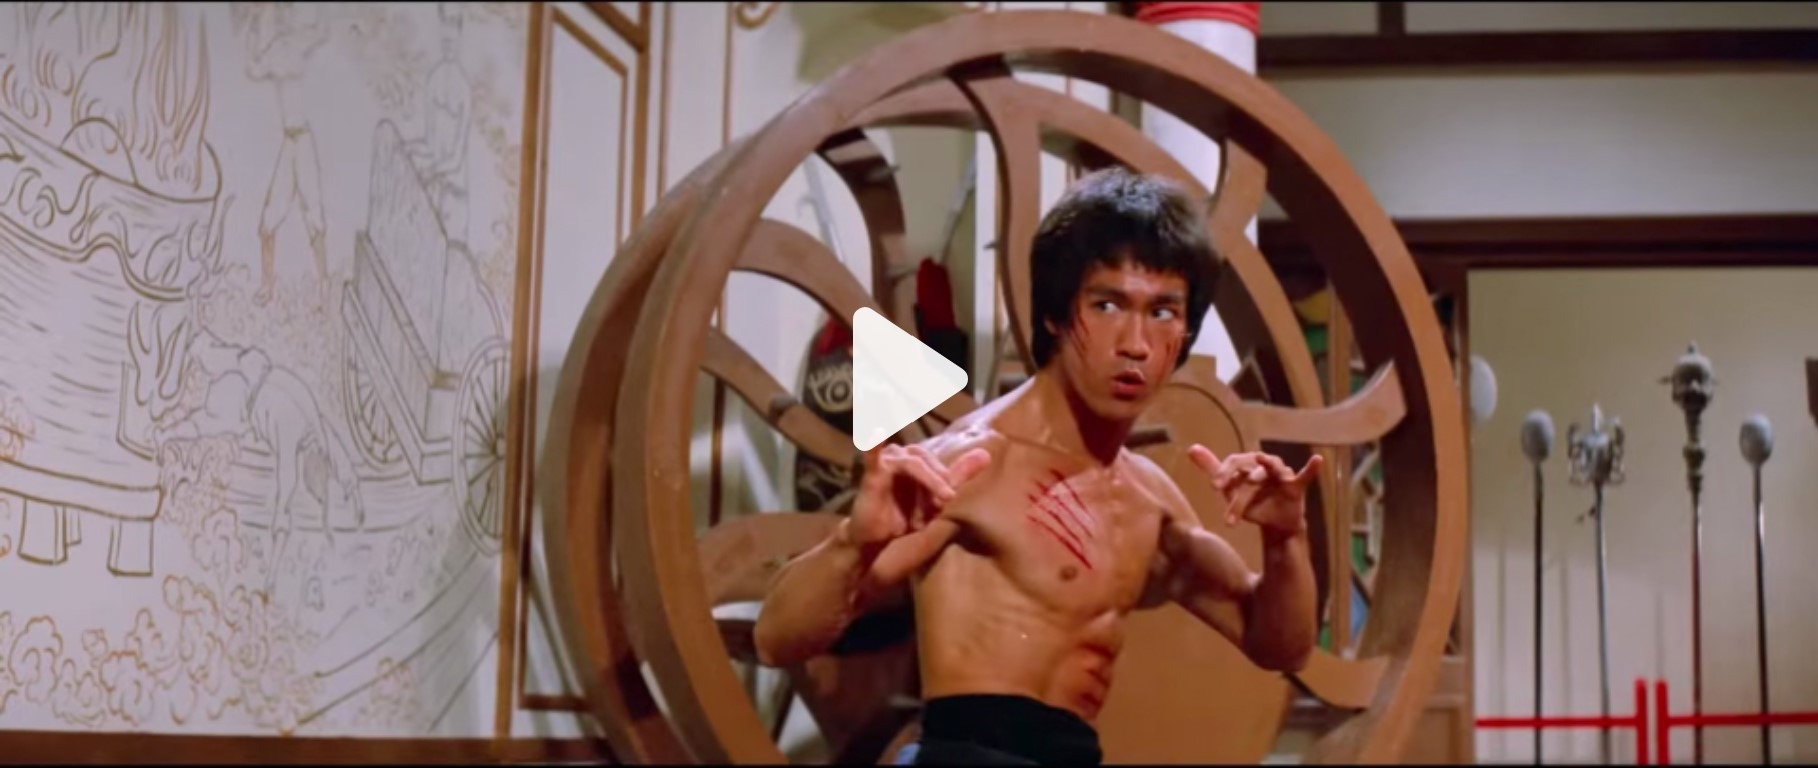 Hollywood Minute: ‘Enter The Dragon’ back in theaters